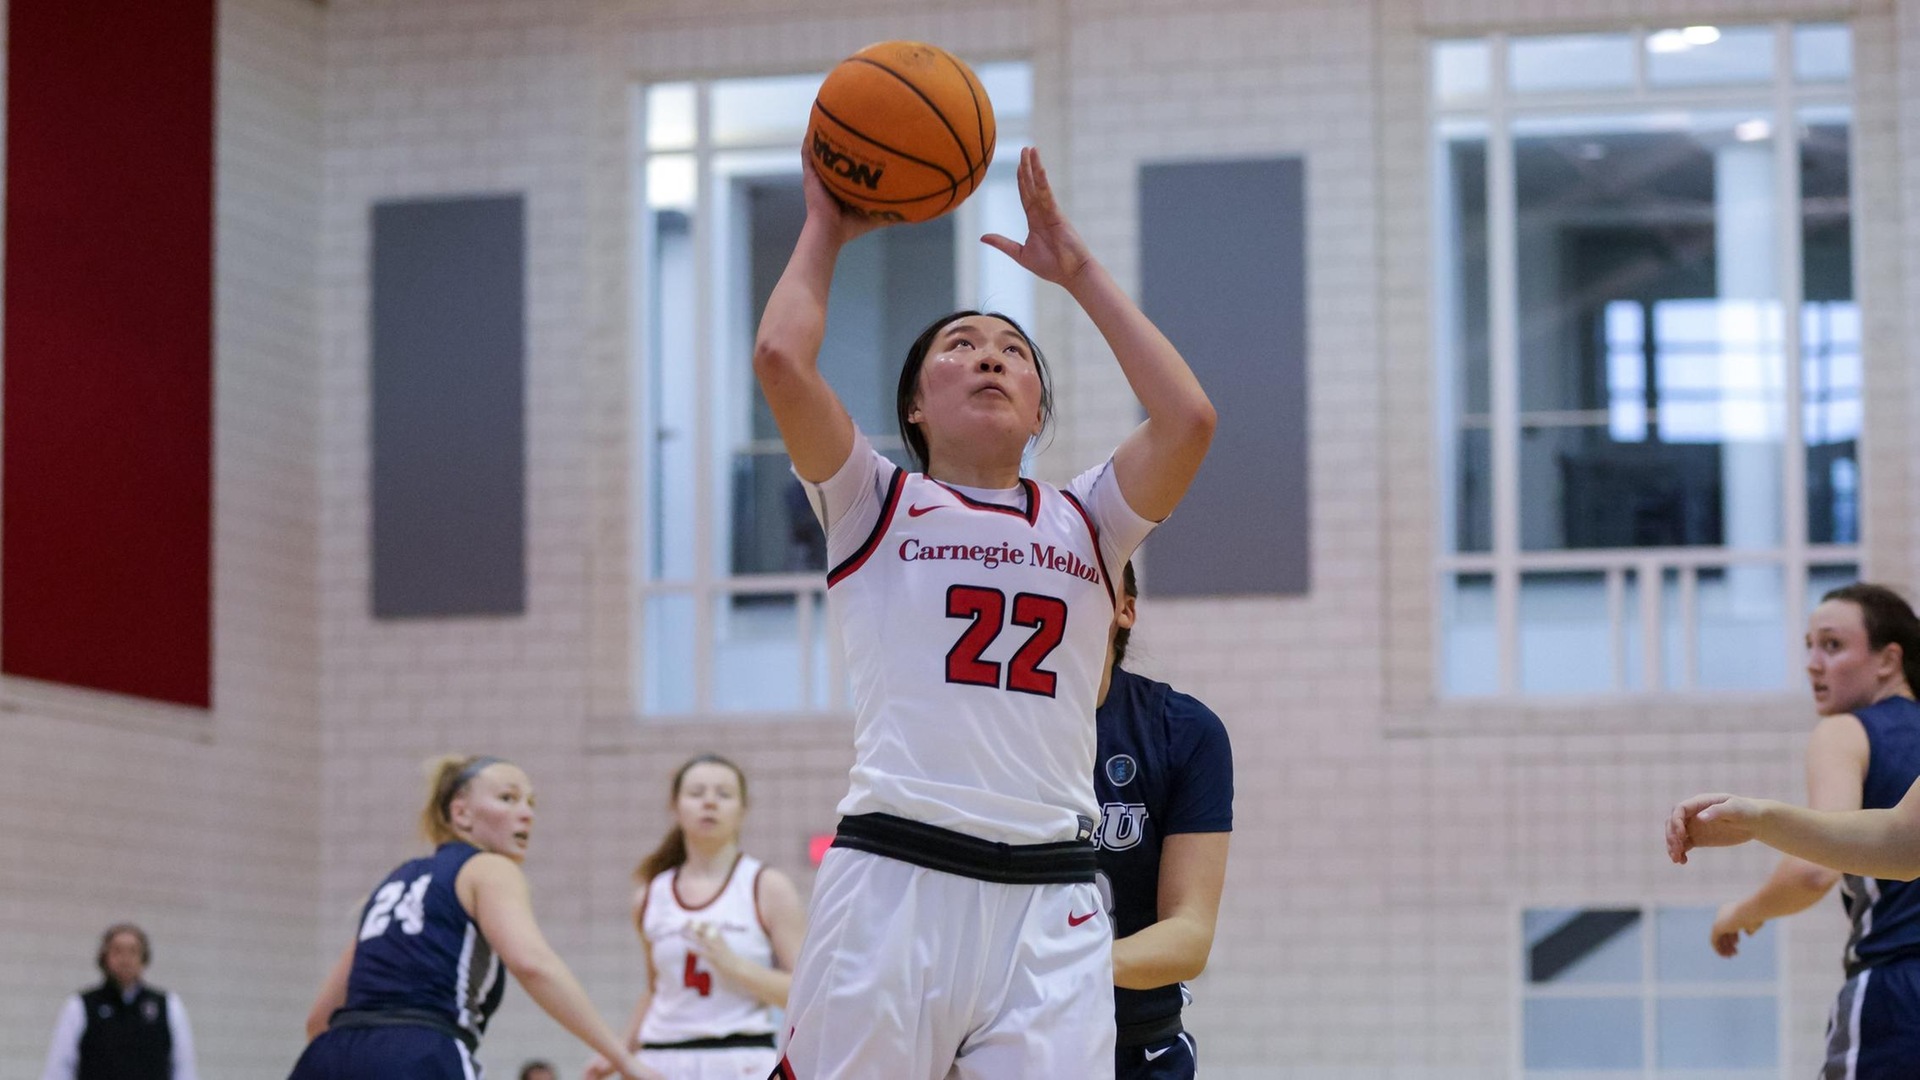 women's basketball player wearing a white uniform taking a right-handed shot